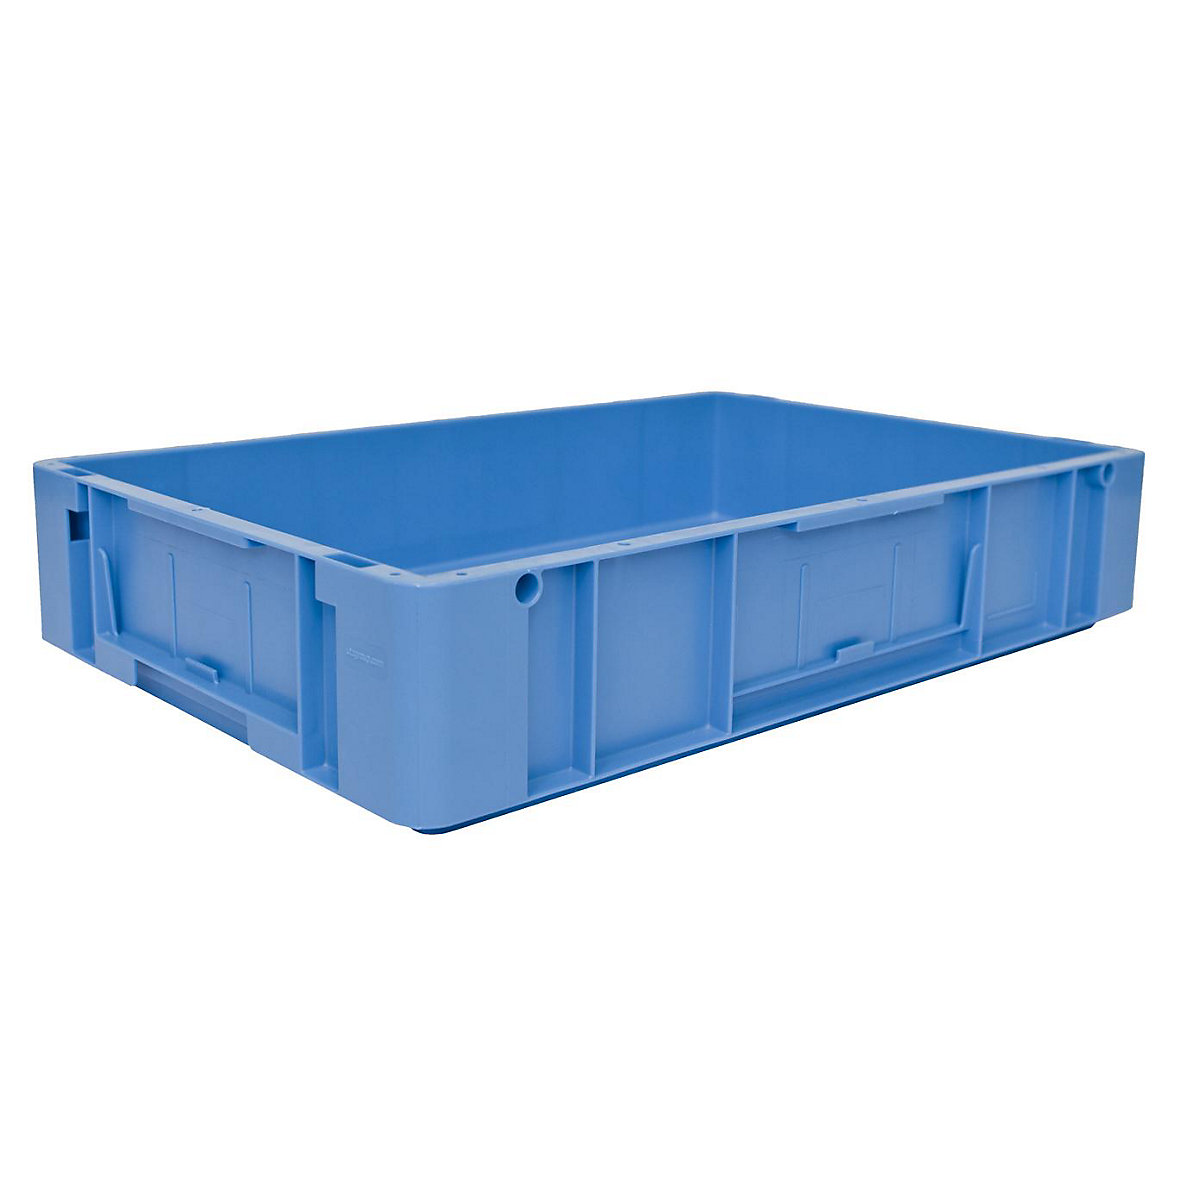 Euro size stacking containers, external LxWxH 600 x 400 x 120 mm, blue, pack of 3